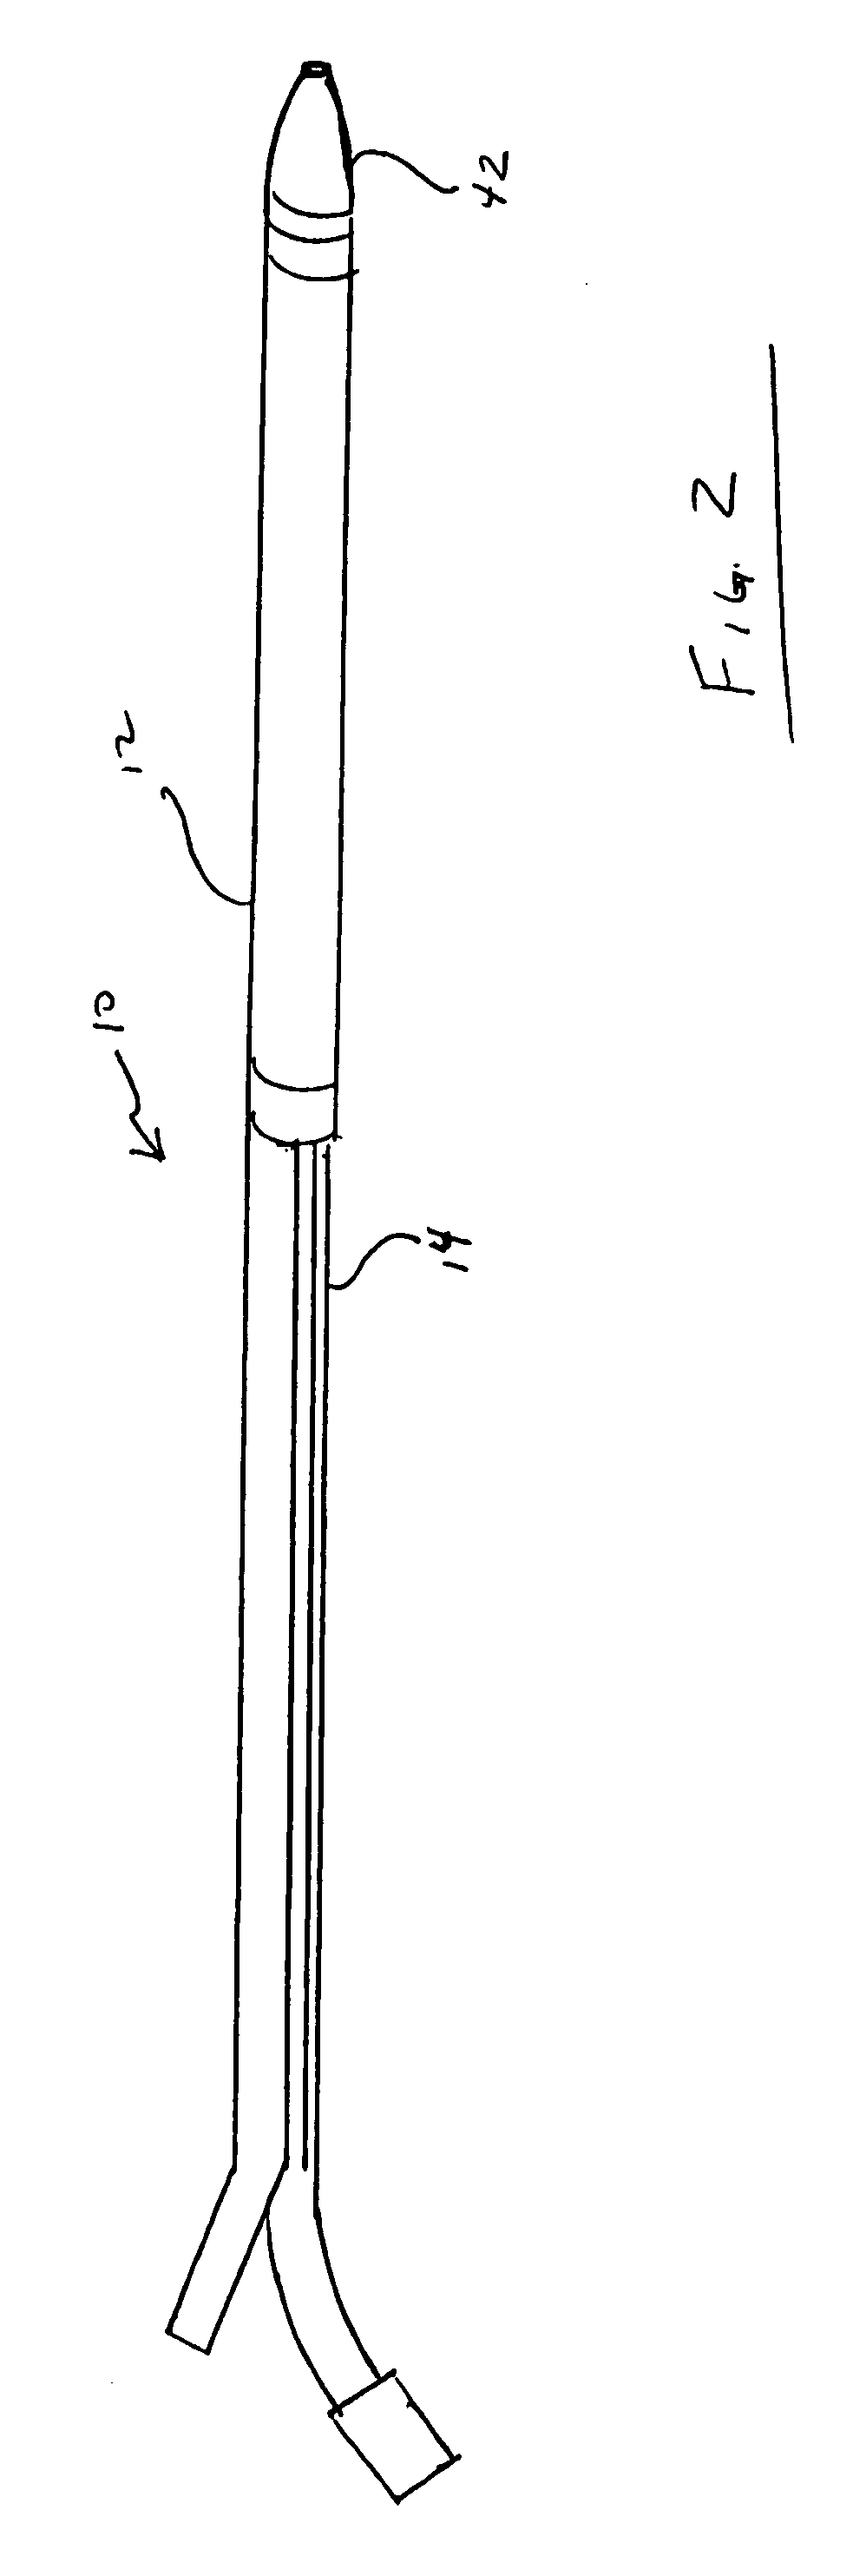 Coaxial guide catheter for interventional cardiology procedures